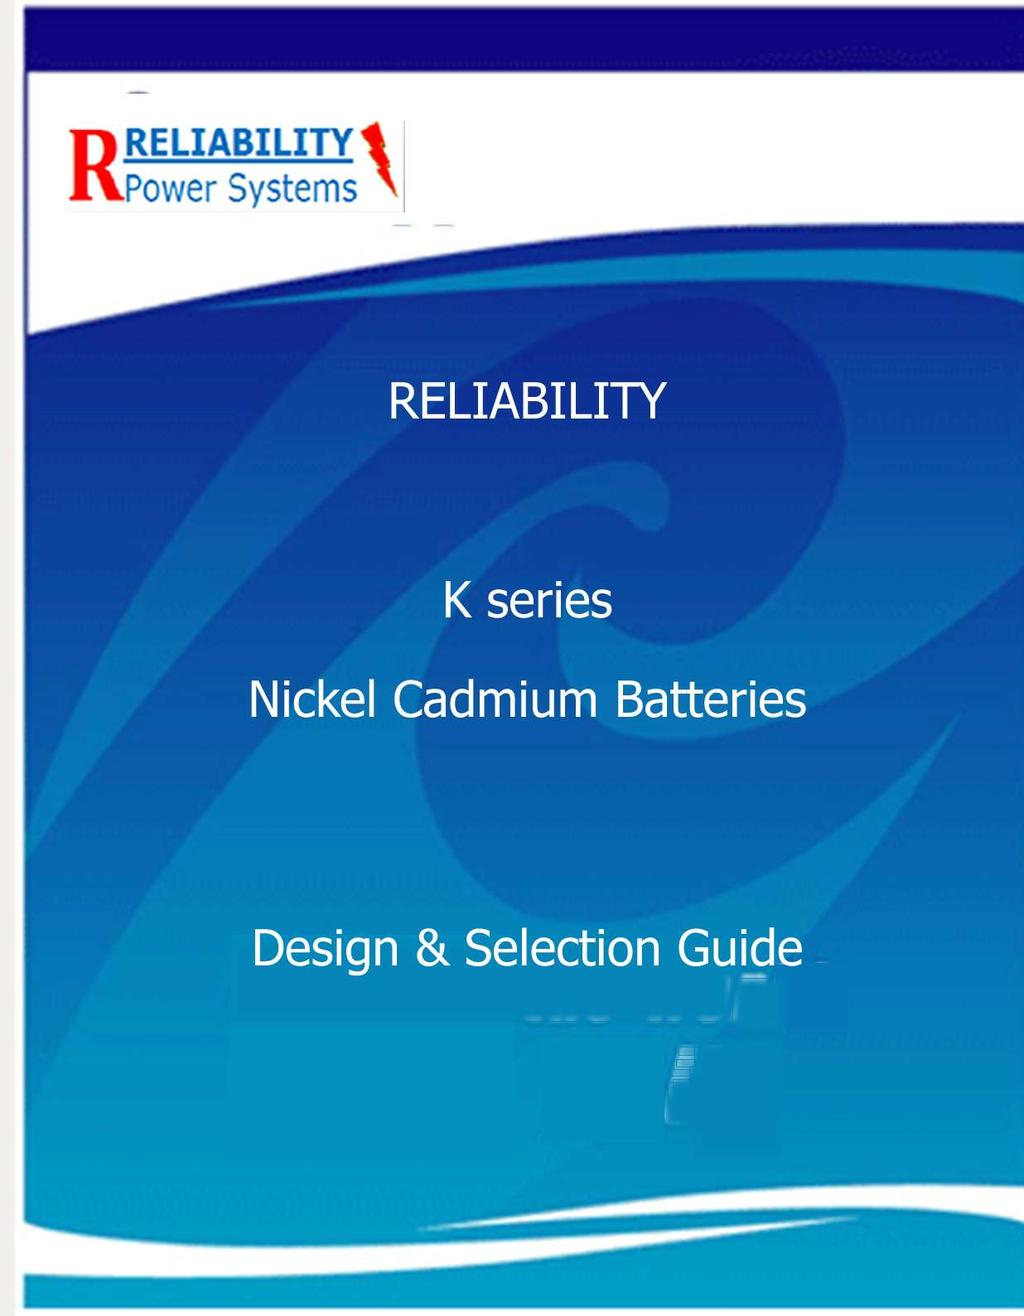 RELIABILITY Power Systems Ni-Cd